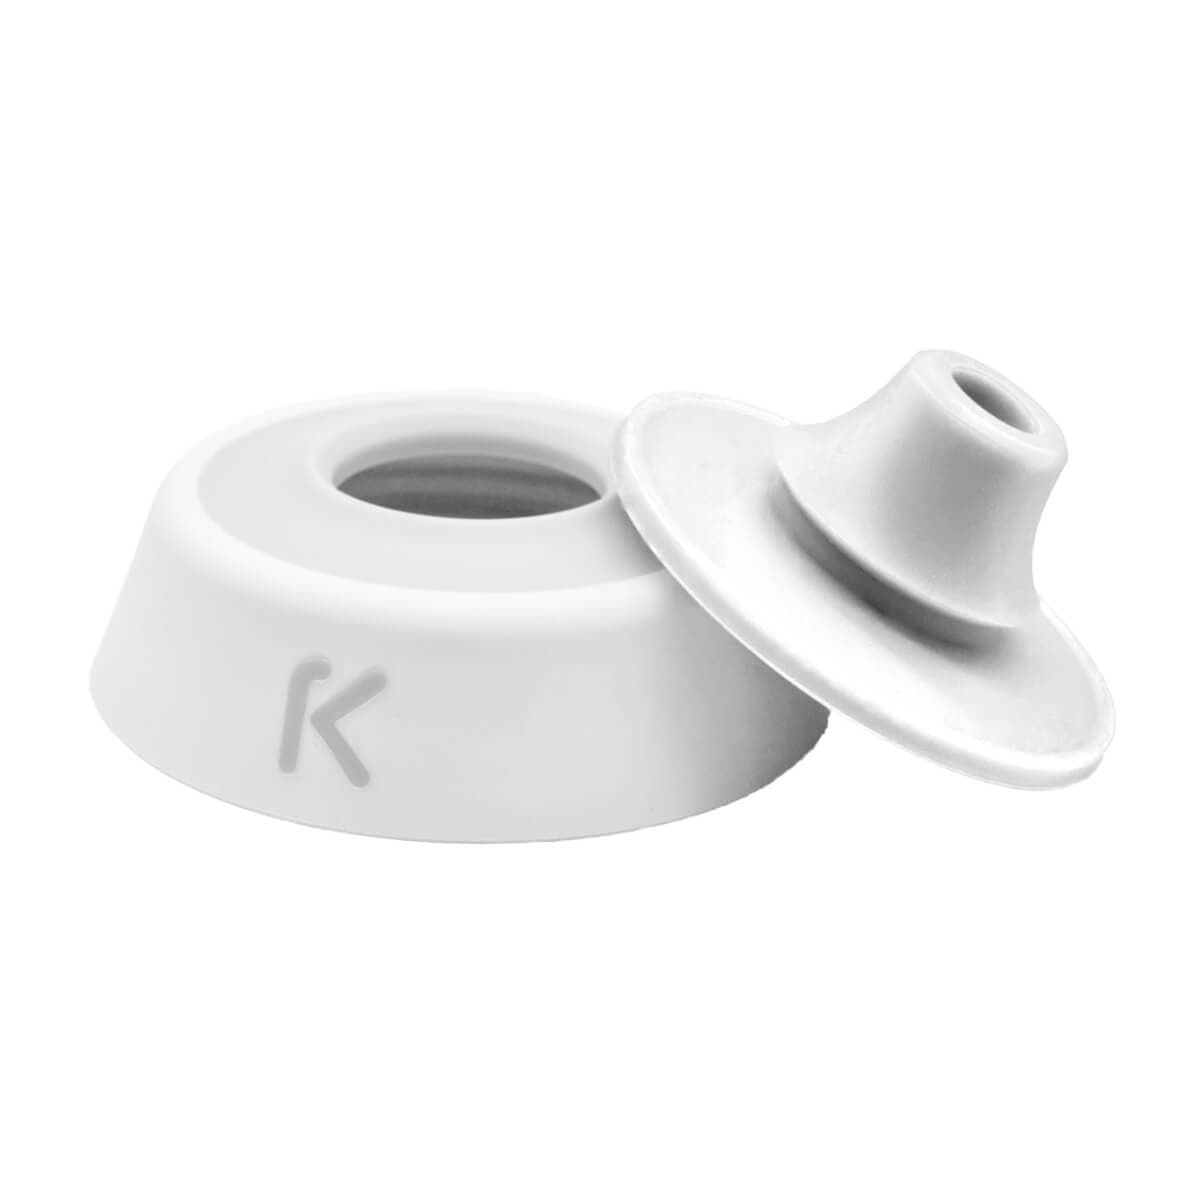 White EasyClean two-piece cap disassembled